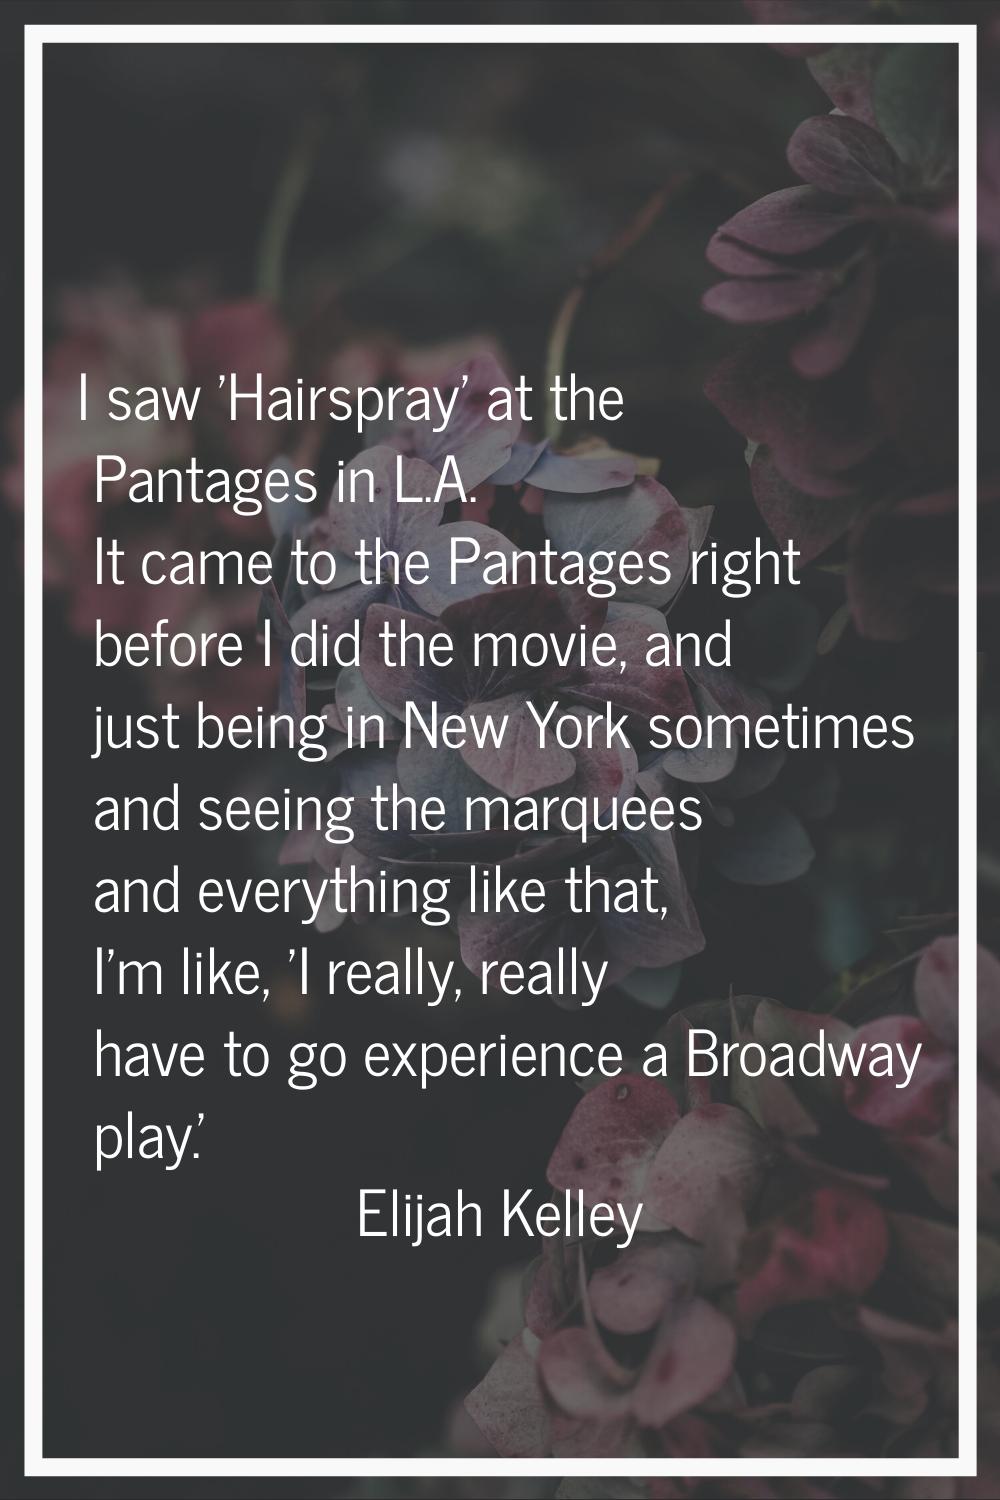 I saw 'Hairspray' at the Pantages in L.A. It came to the Pantages right before I did the movie, and